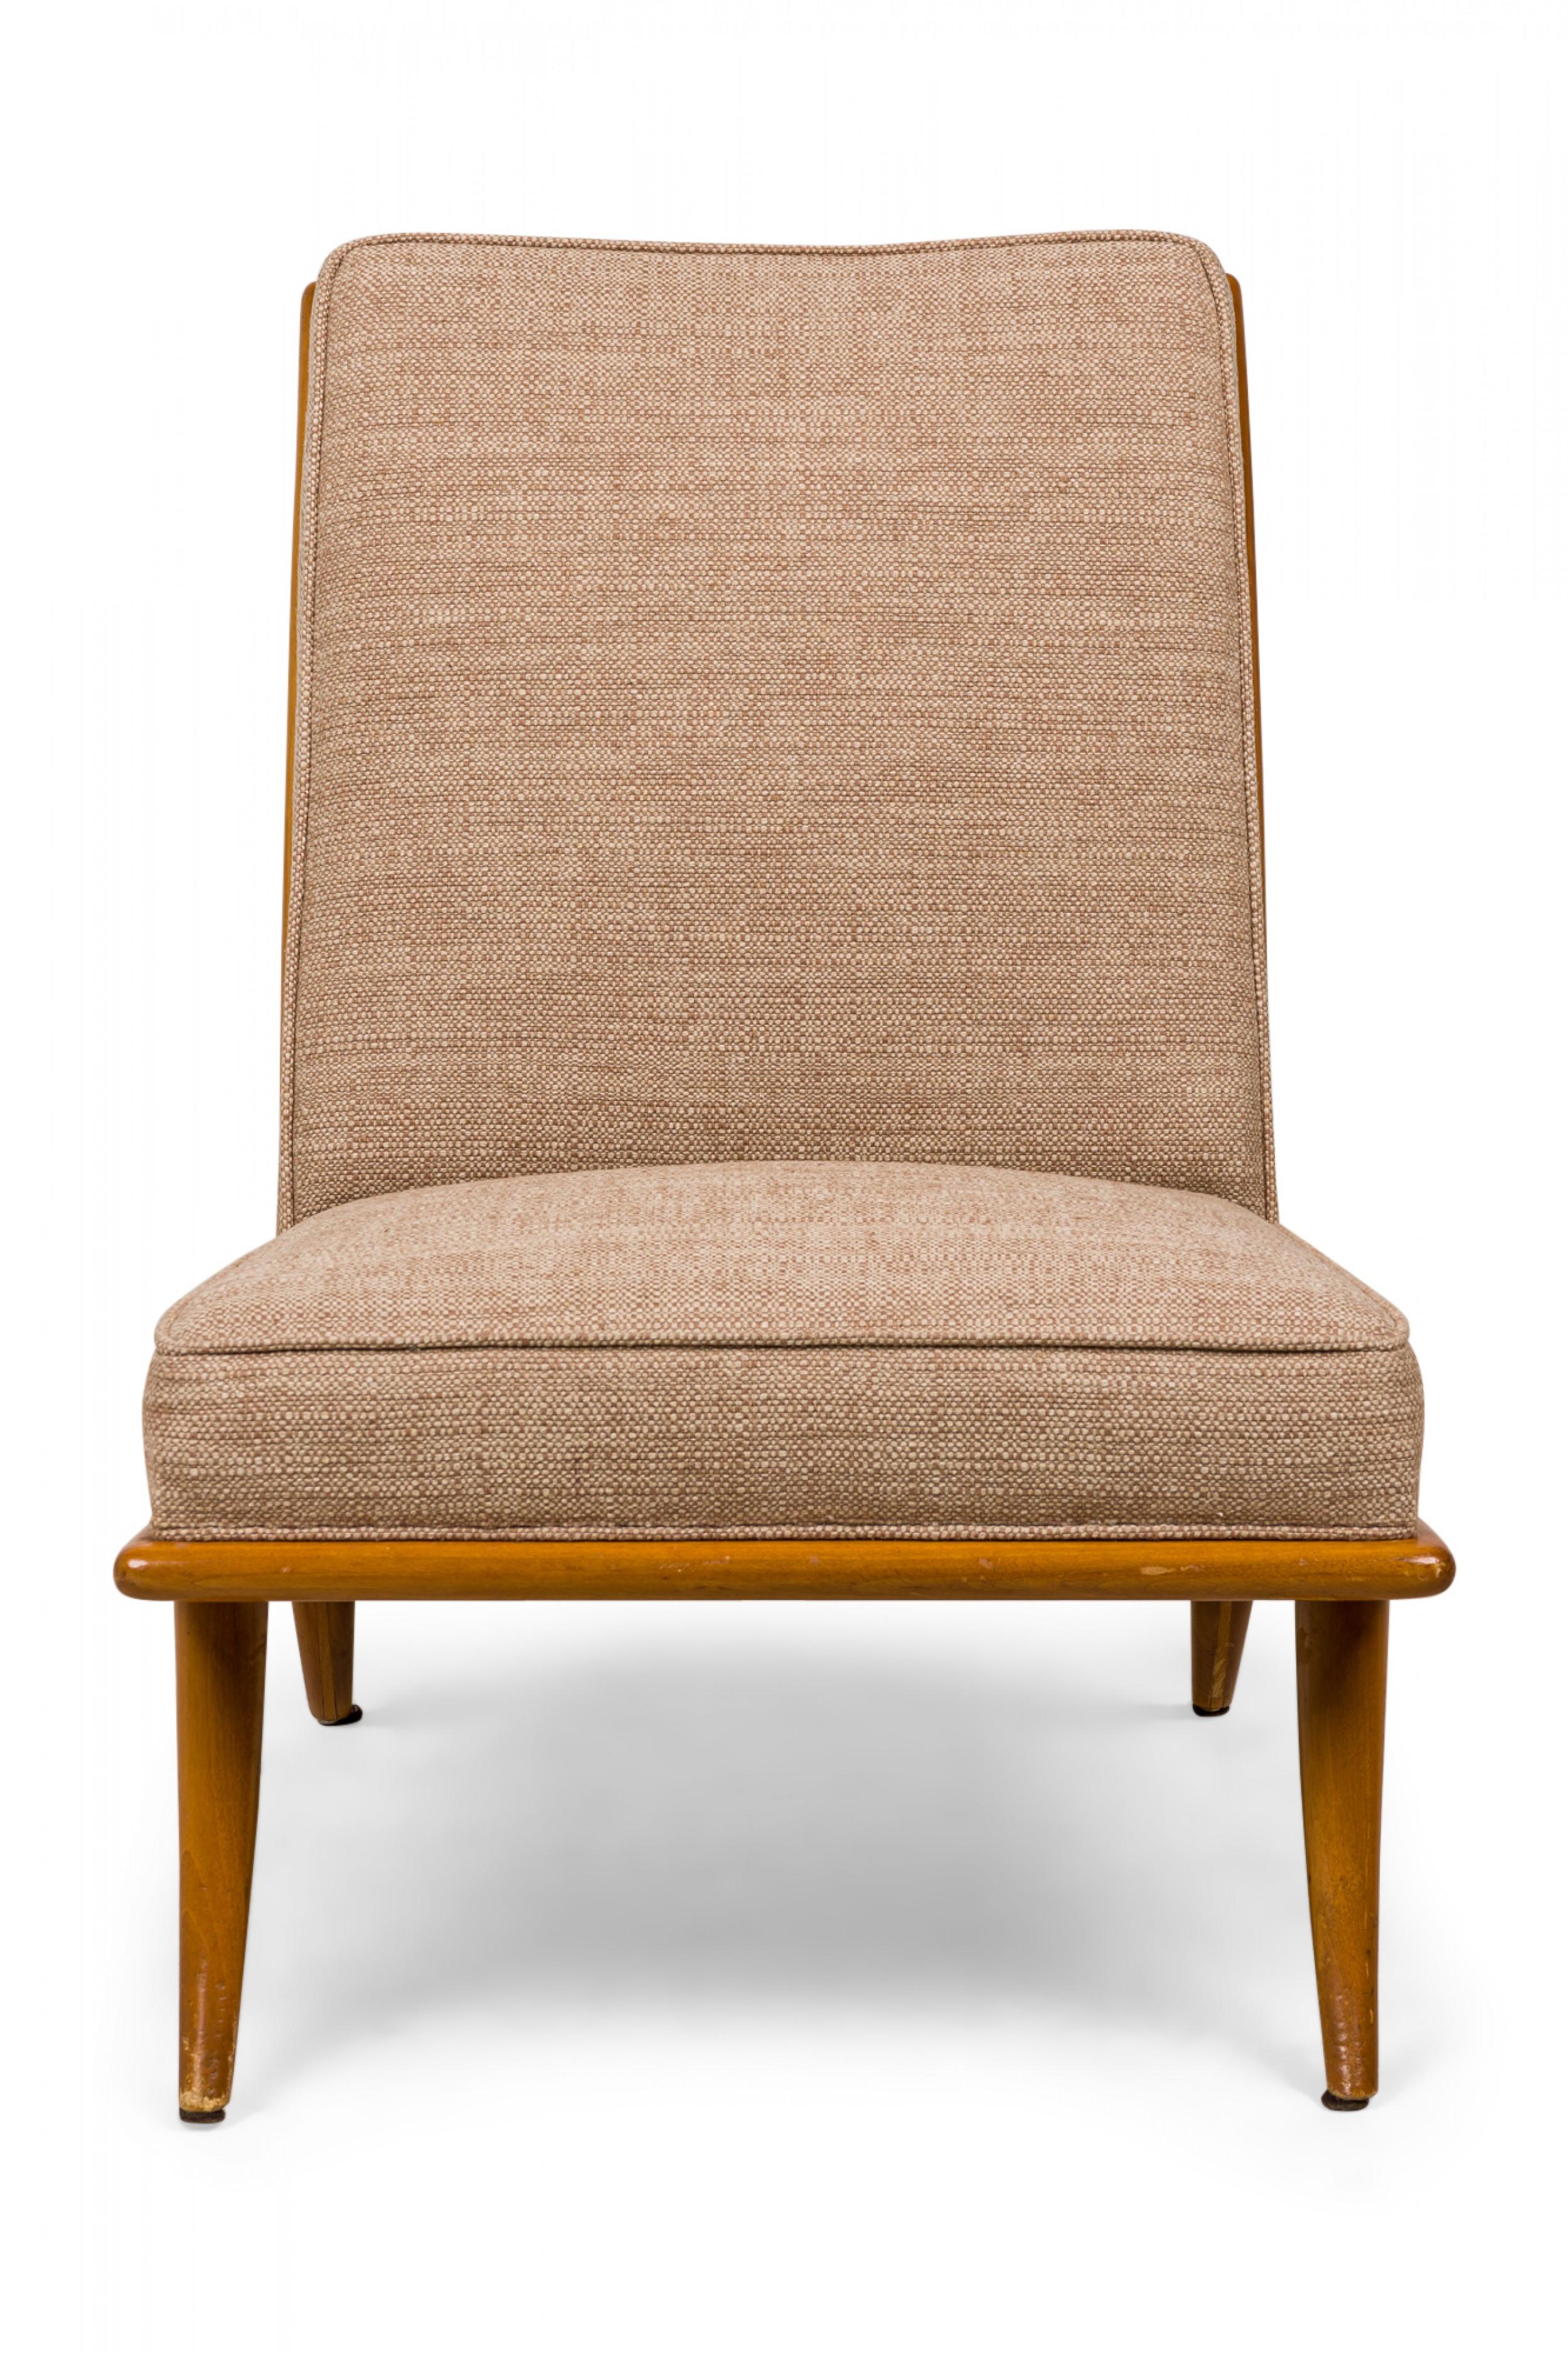 Mid-Century slipper / side chair with textured tan fabric upholstery and a walnut frame resting on four gently curved and tapered legs. (T.H. ROBSJOHN-GIBBINGS FOR WIDDICOMB)(Similar pieces: DUF0544, DUF0546)
